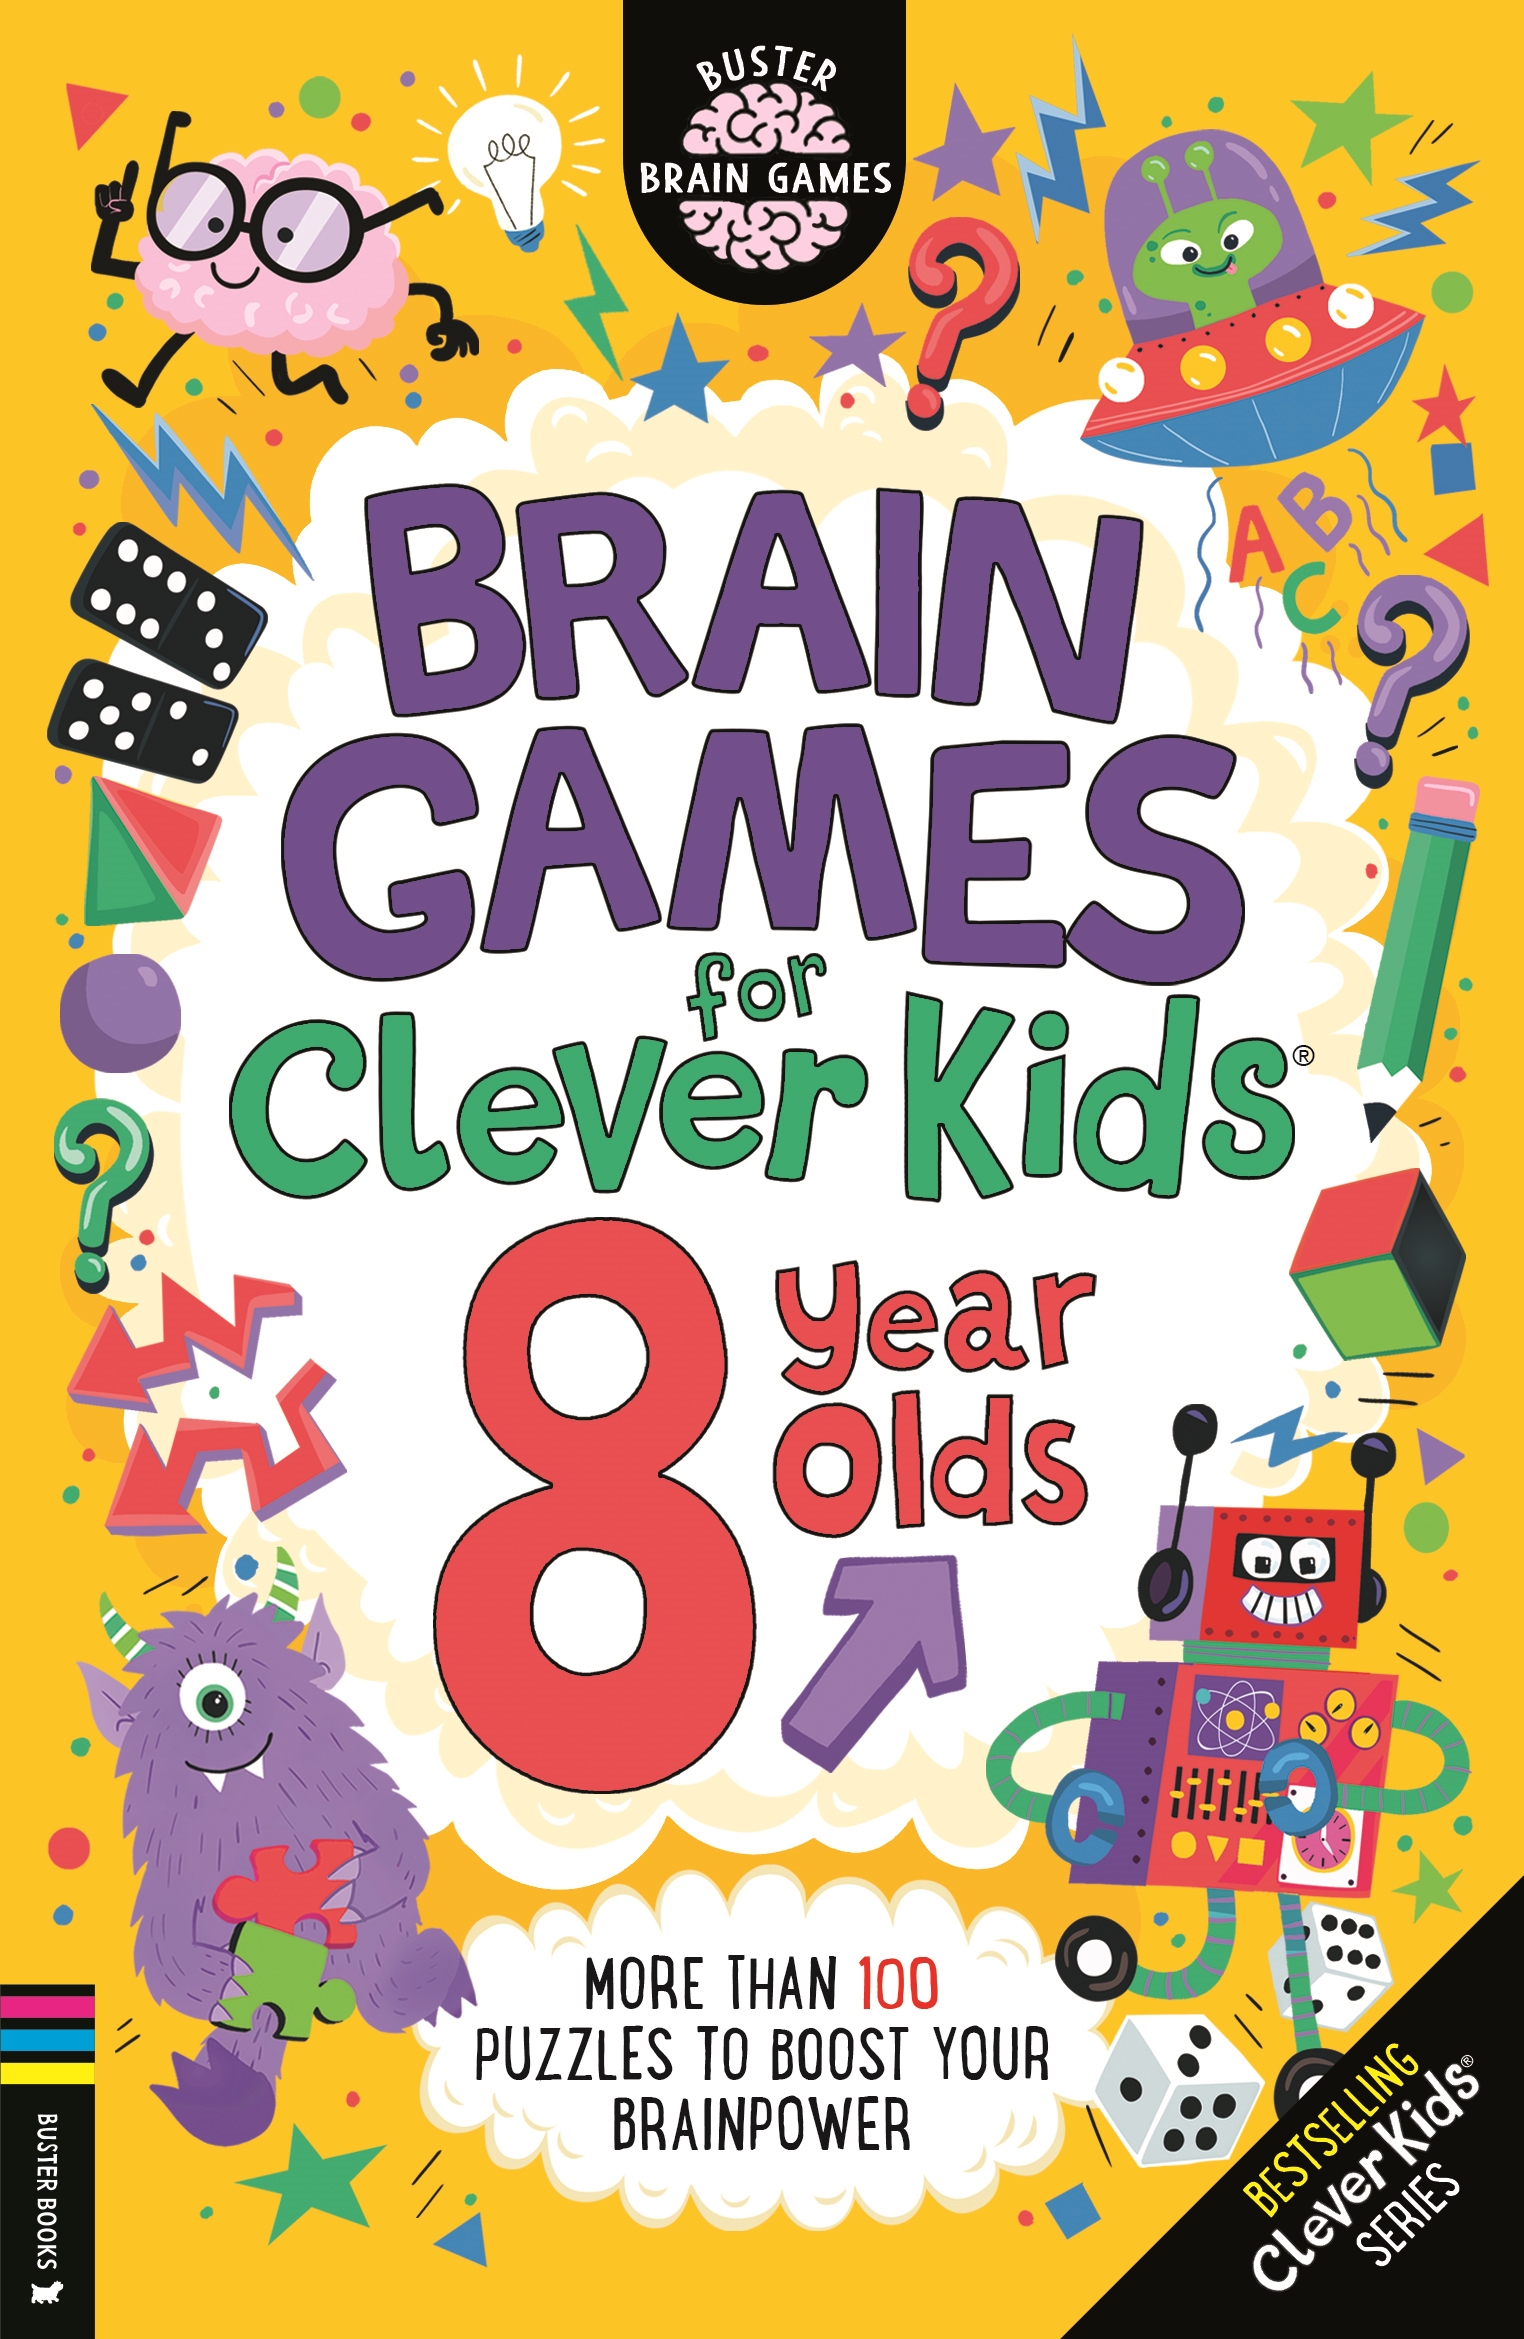 Brain Games for Clever Kids® 8 Year Olds